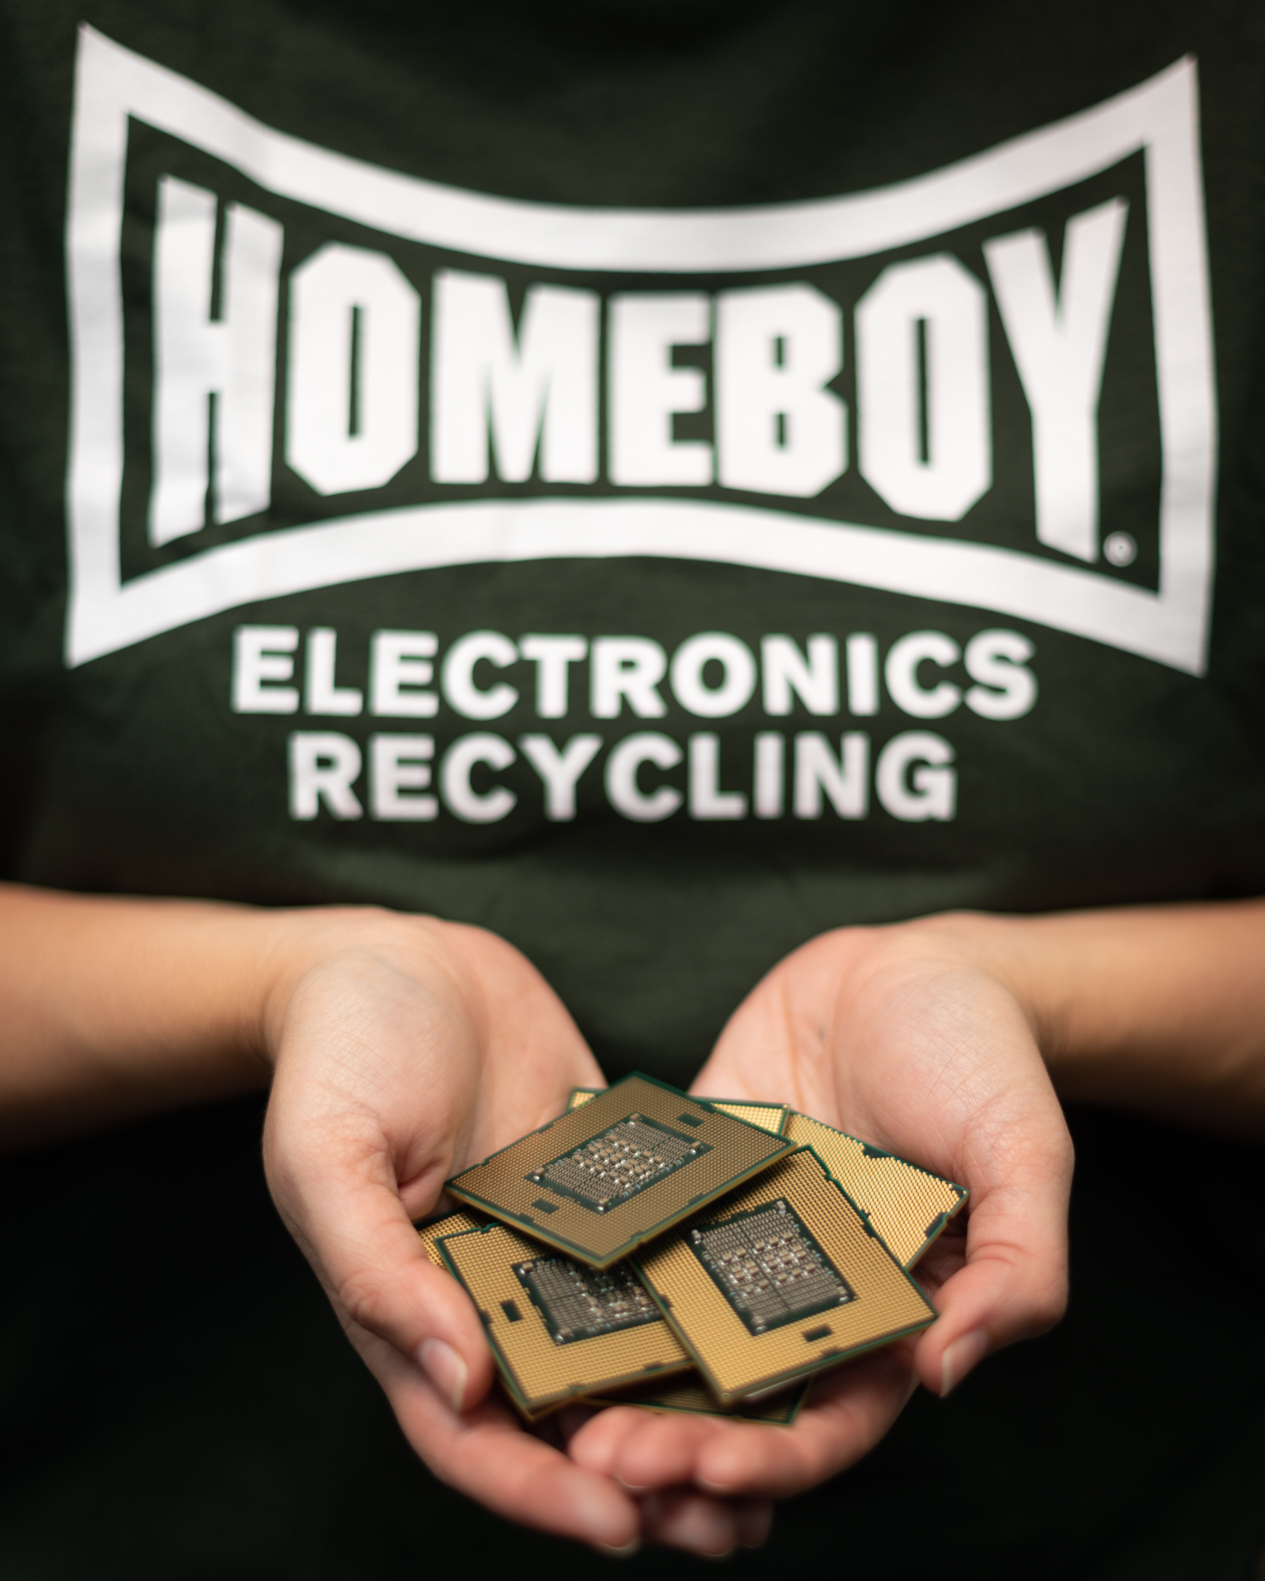 Mailback Your Old Electronics with Homeboy Electronics Recycling